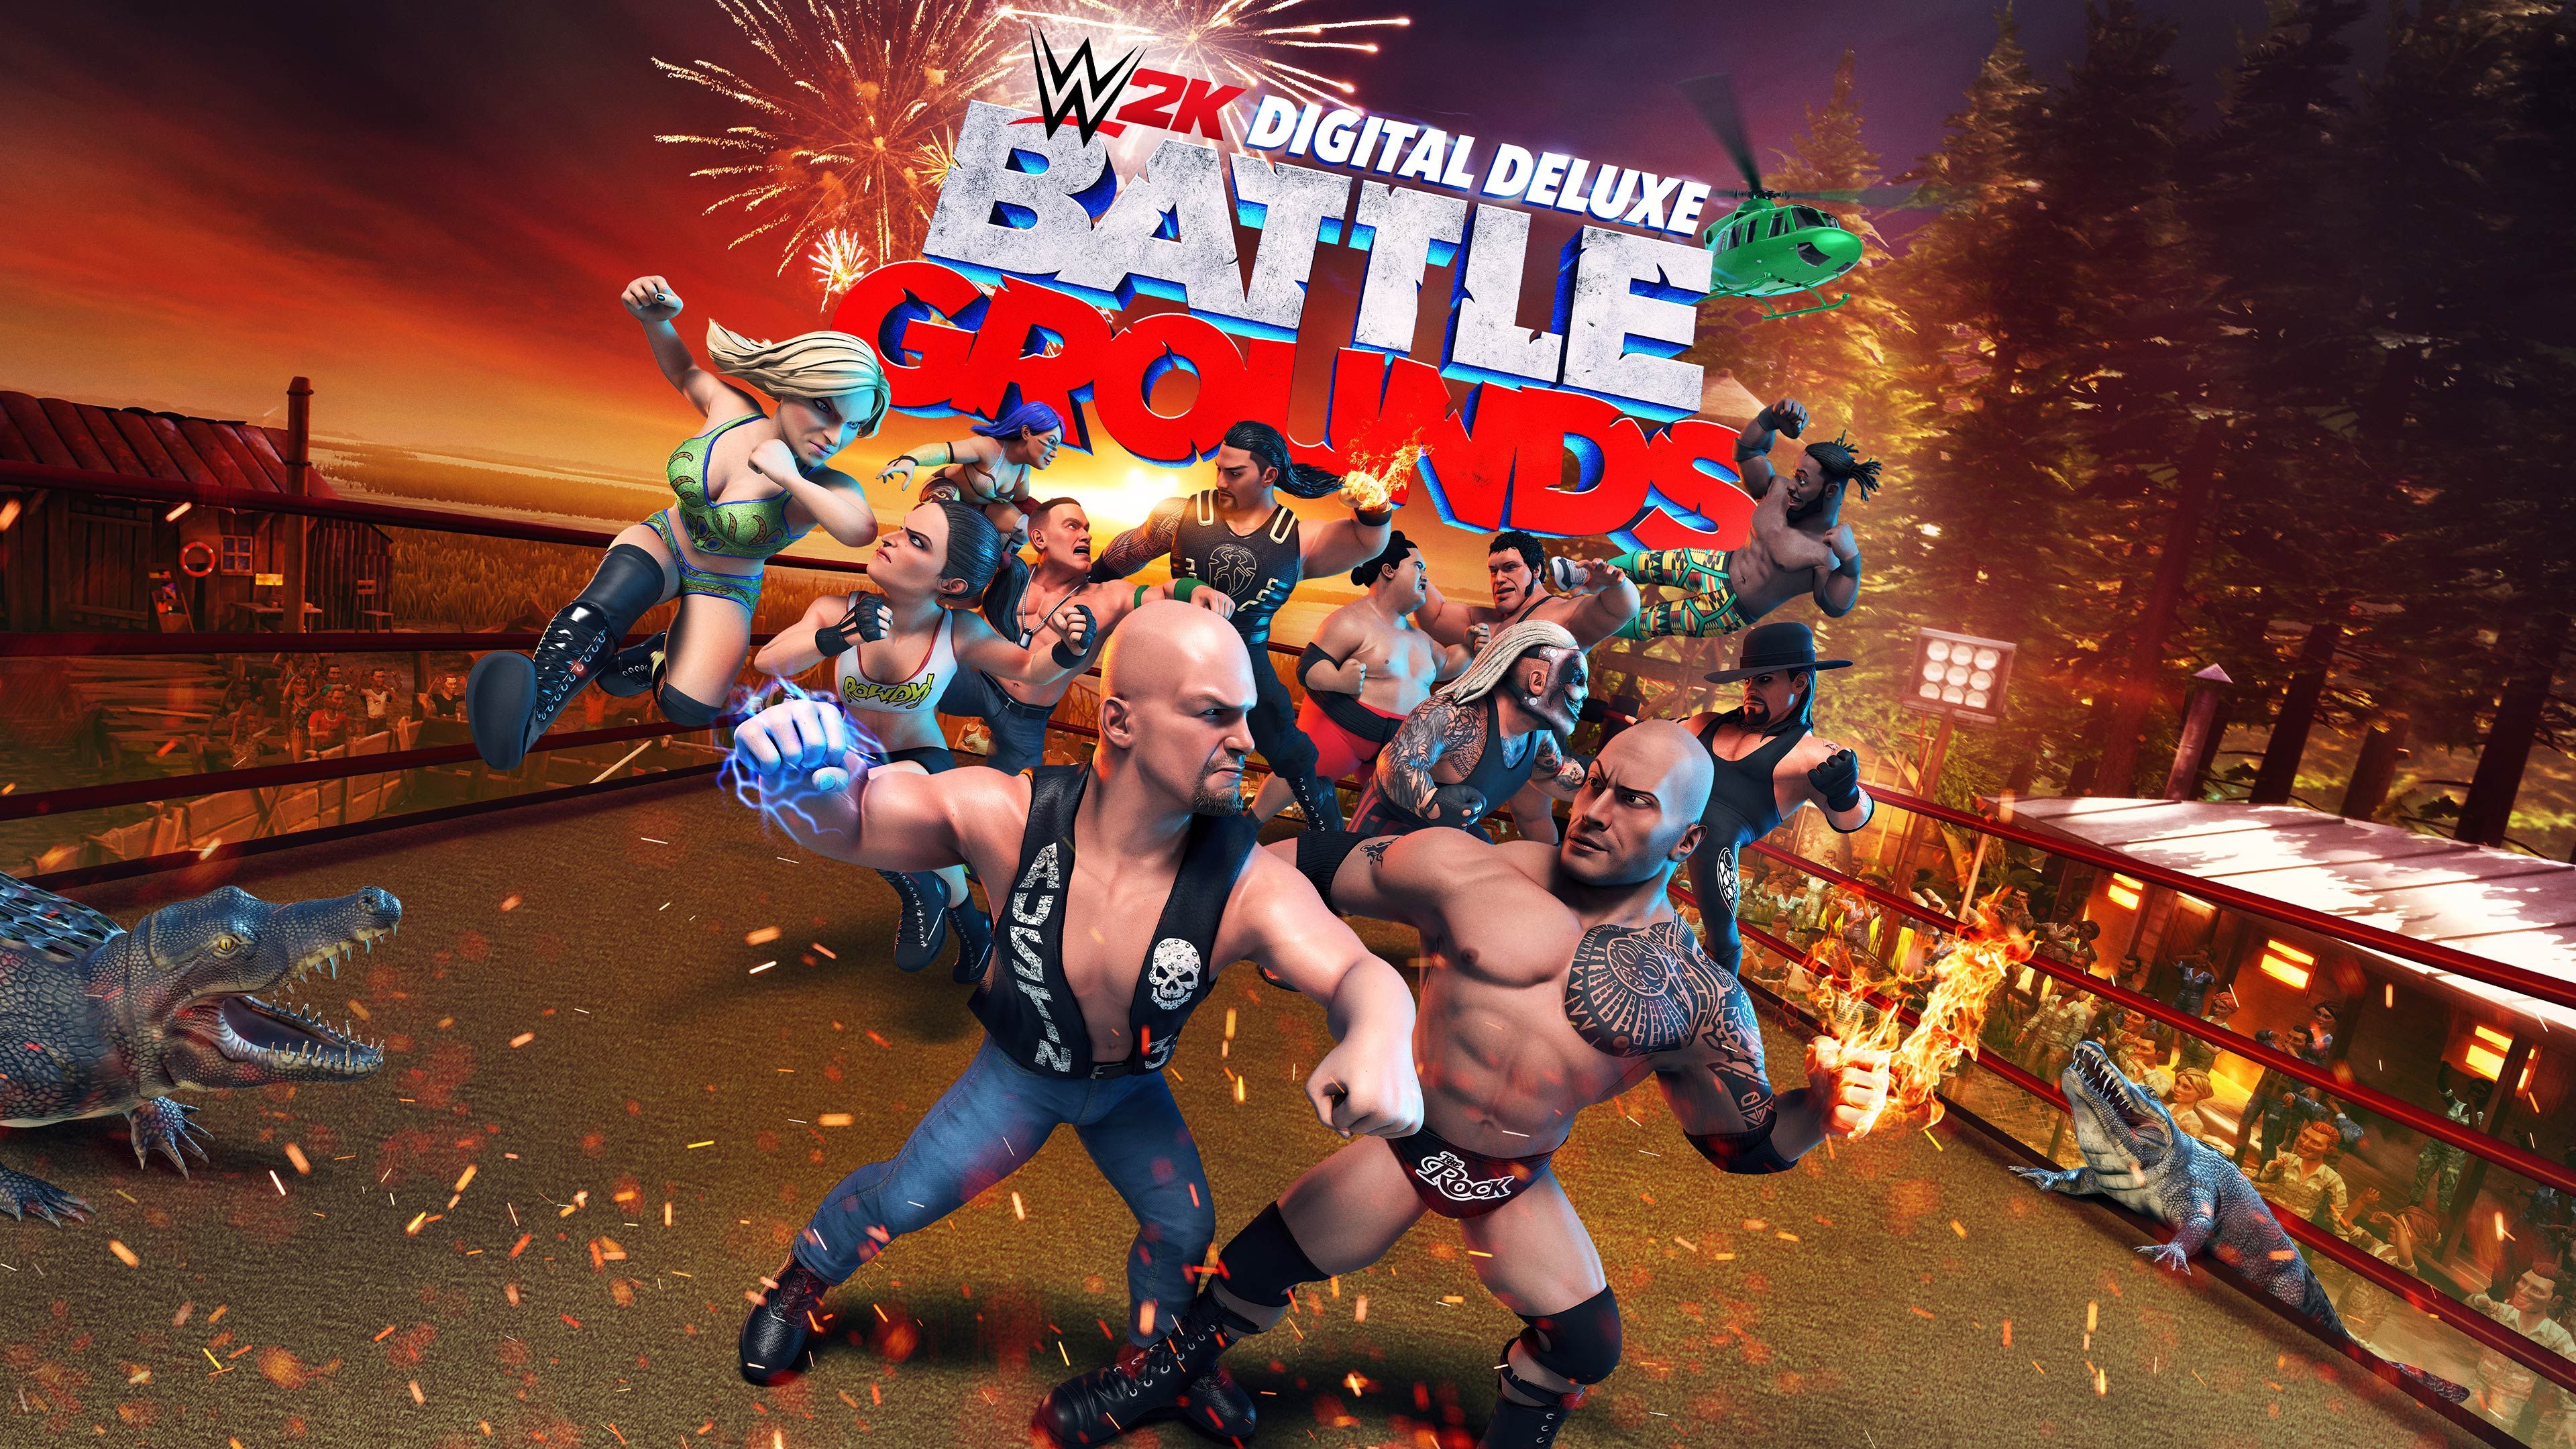 WWE 2K Battlegrounds Digital Deluxe Edition (Simplified Chinese, English, Korean, Japanese, Traditional Chinese)